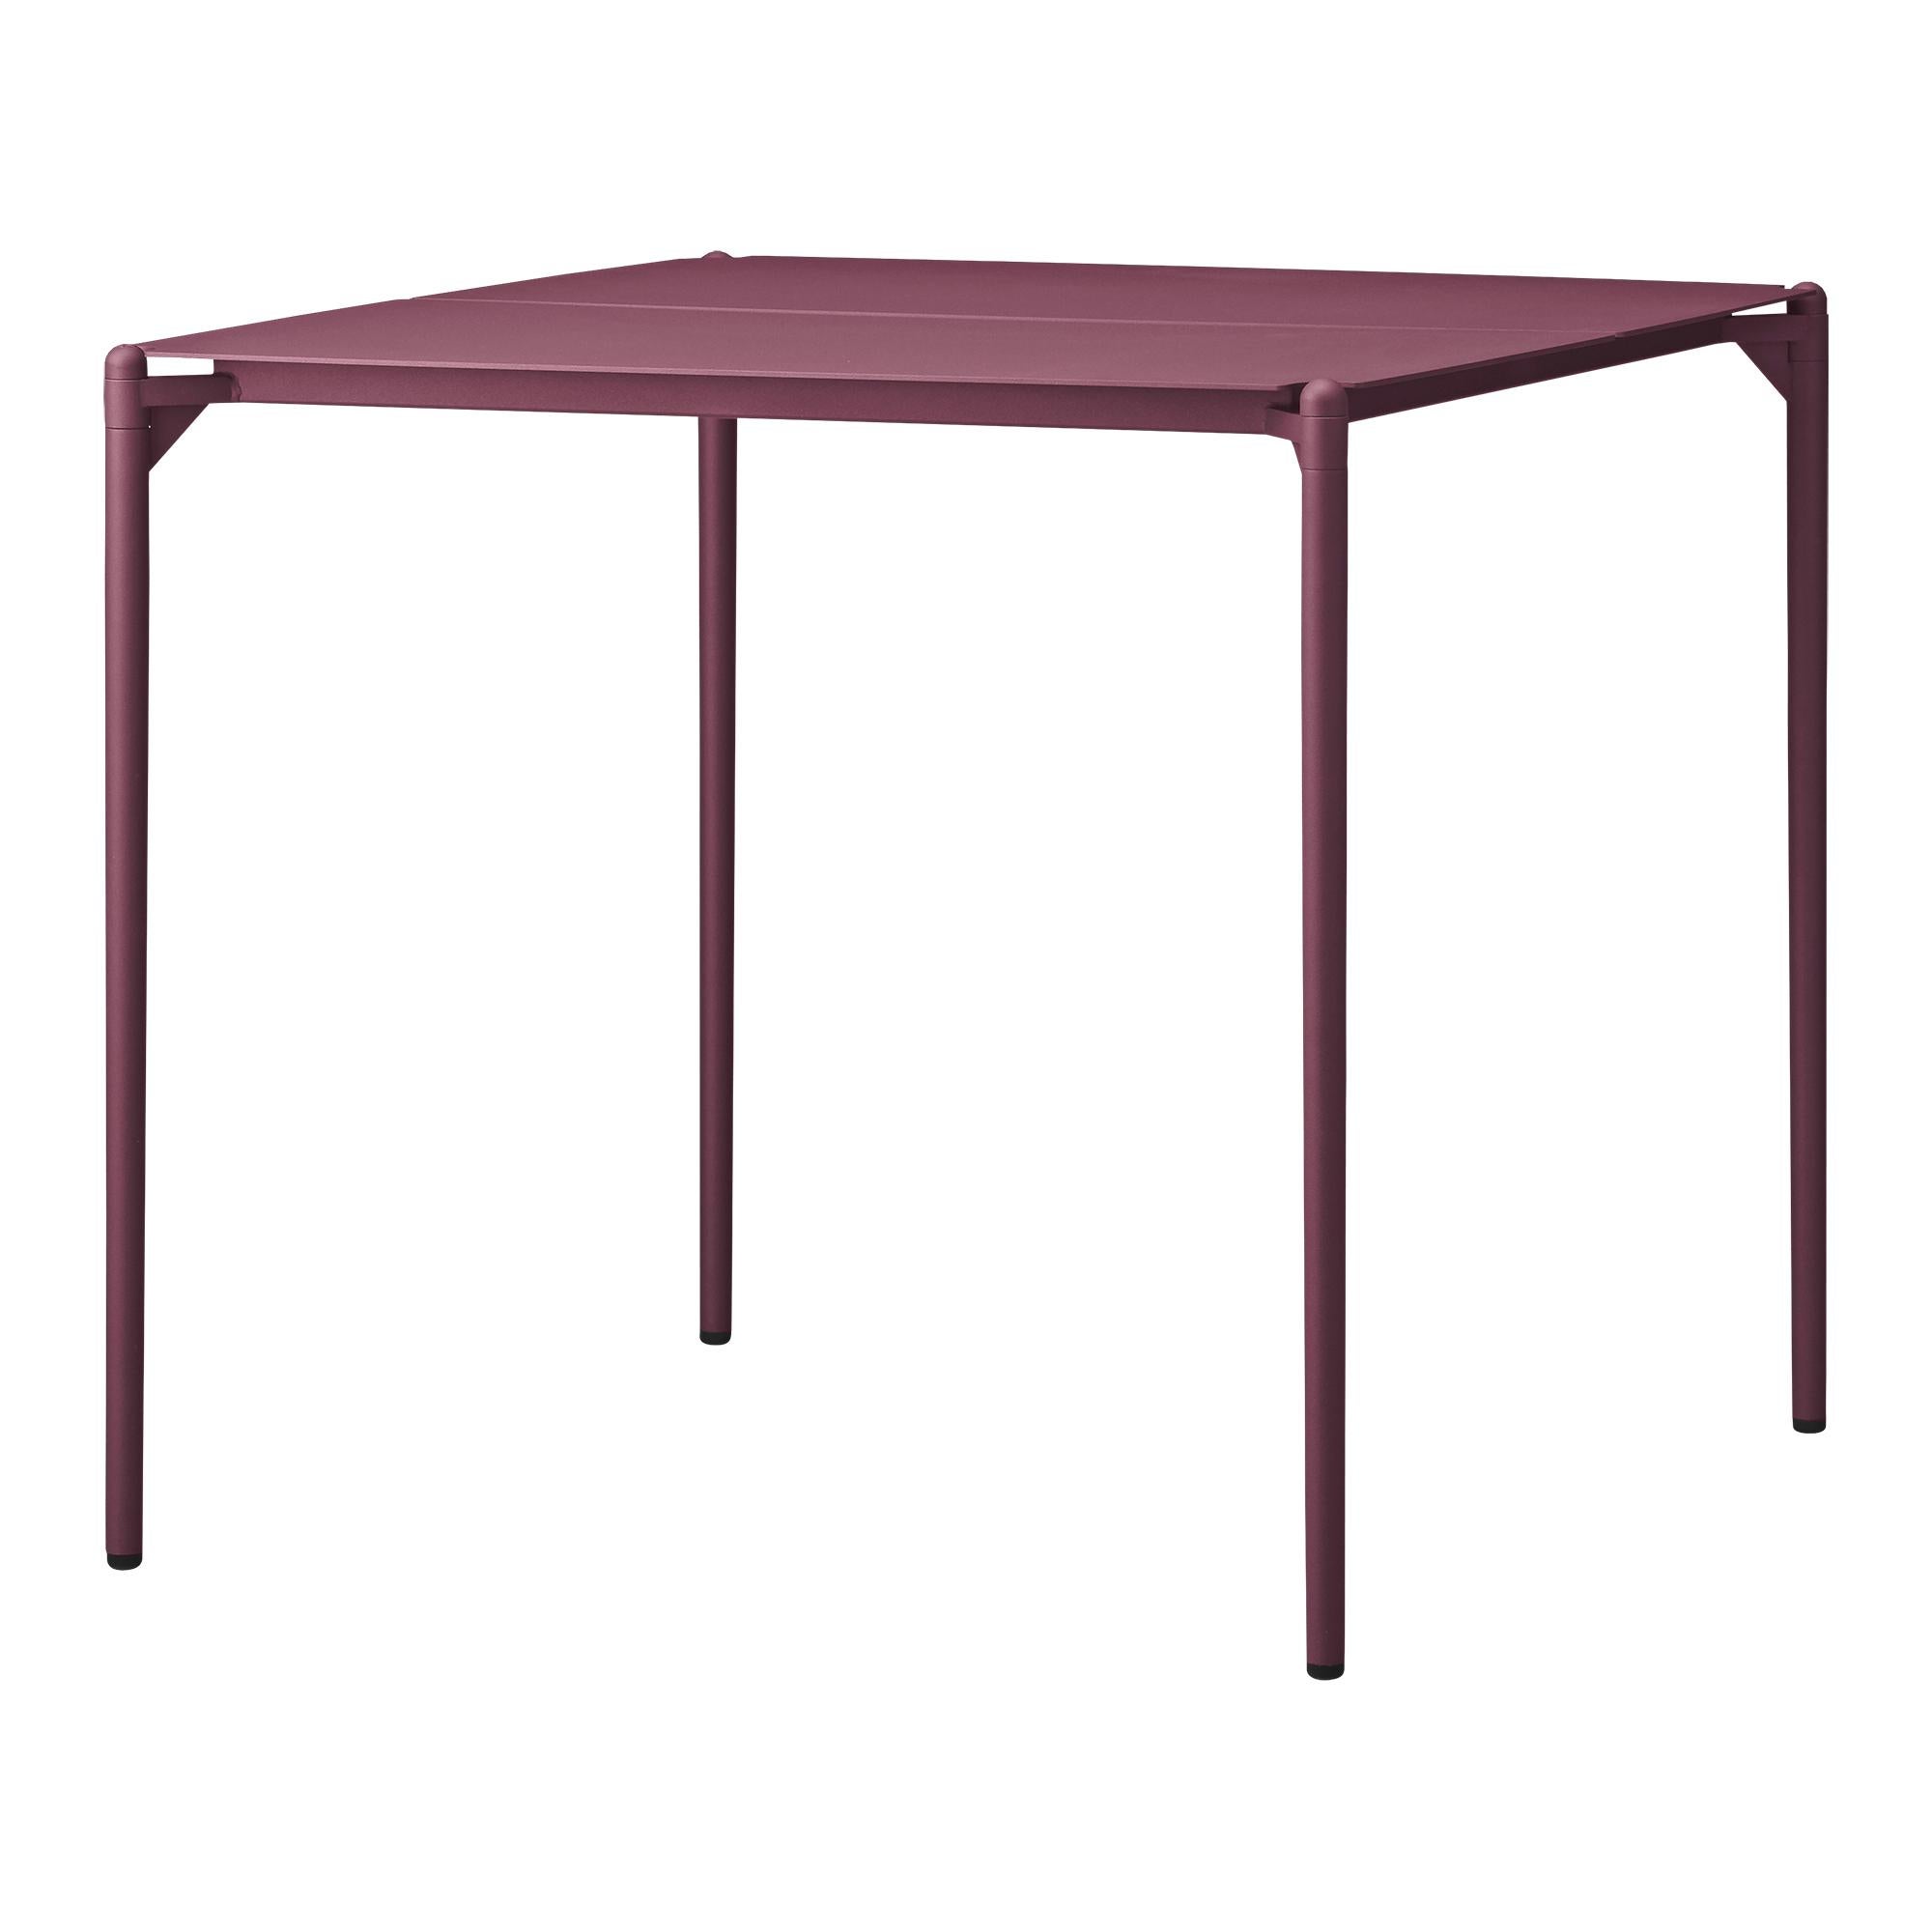 Small Bordeaux Minimalist table
Dimensions: D 80 x W 80 x H 72 cm 
Materials: Steel w. Matte Powder Coating & Aluminum w. Matte Powder Coating
Available in colors: Taupe, Bordeaux, Forest, Ginger Bread, Black and, Black and Gold.


Bring